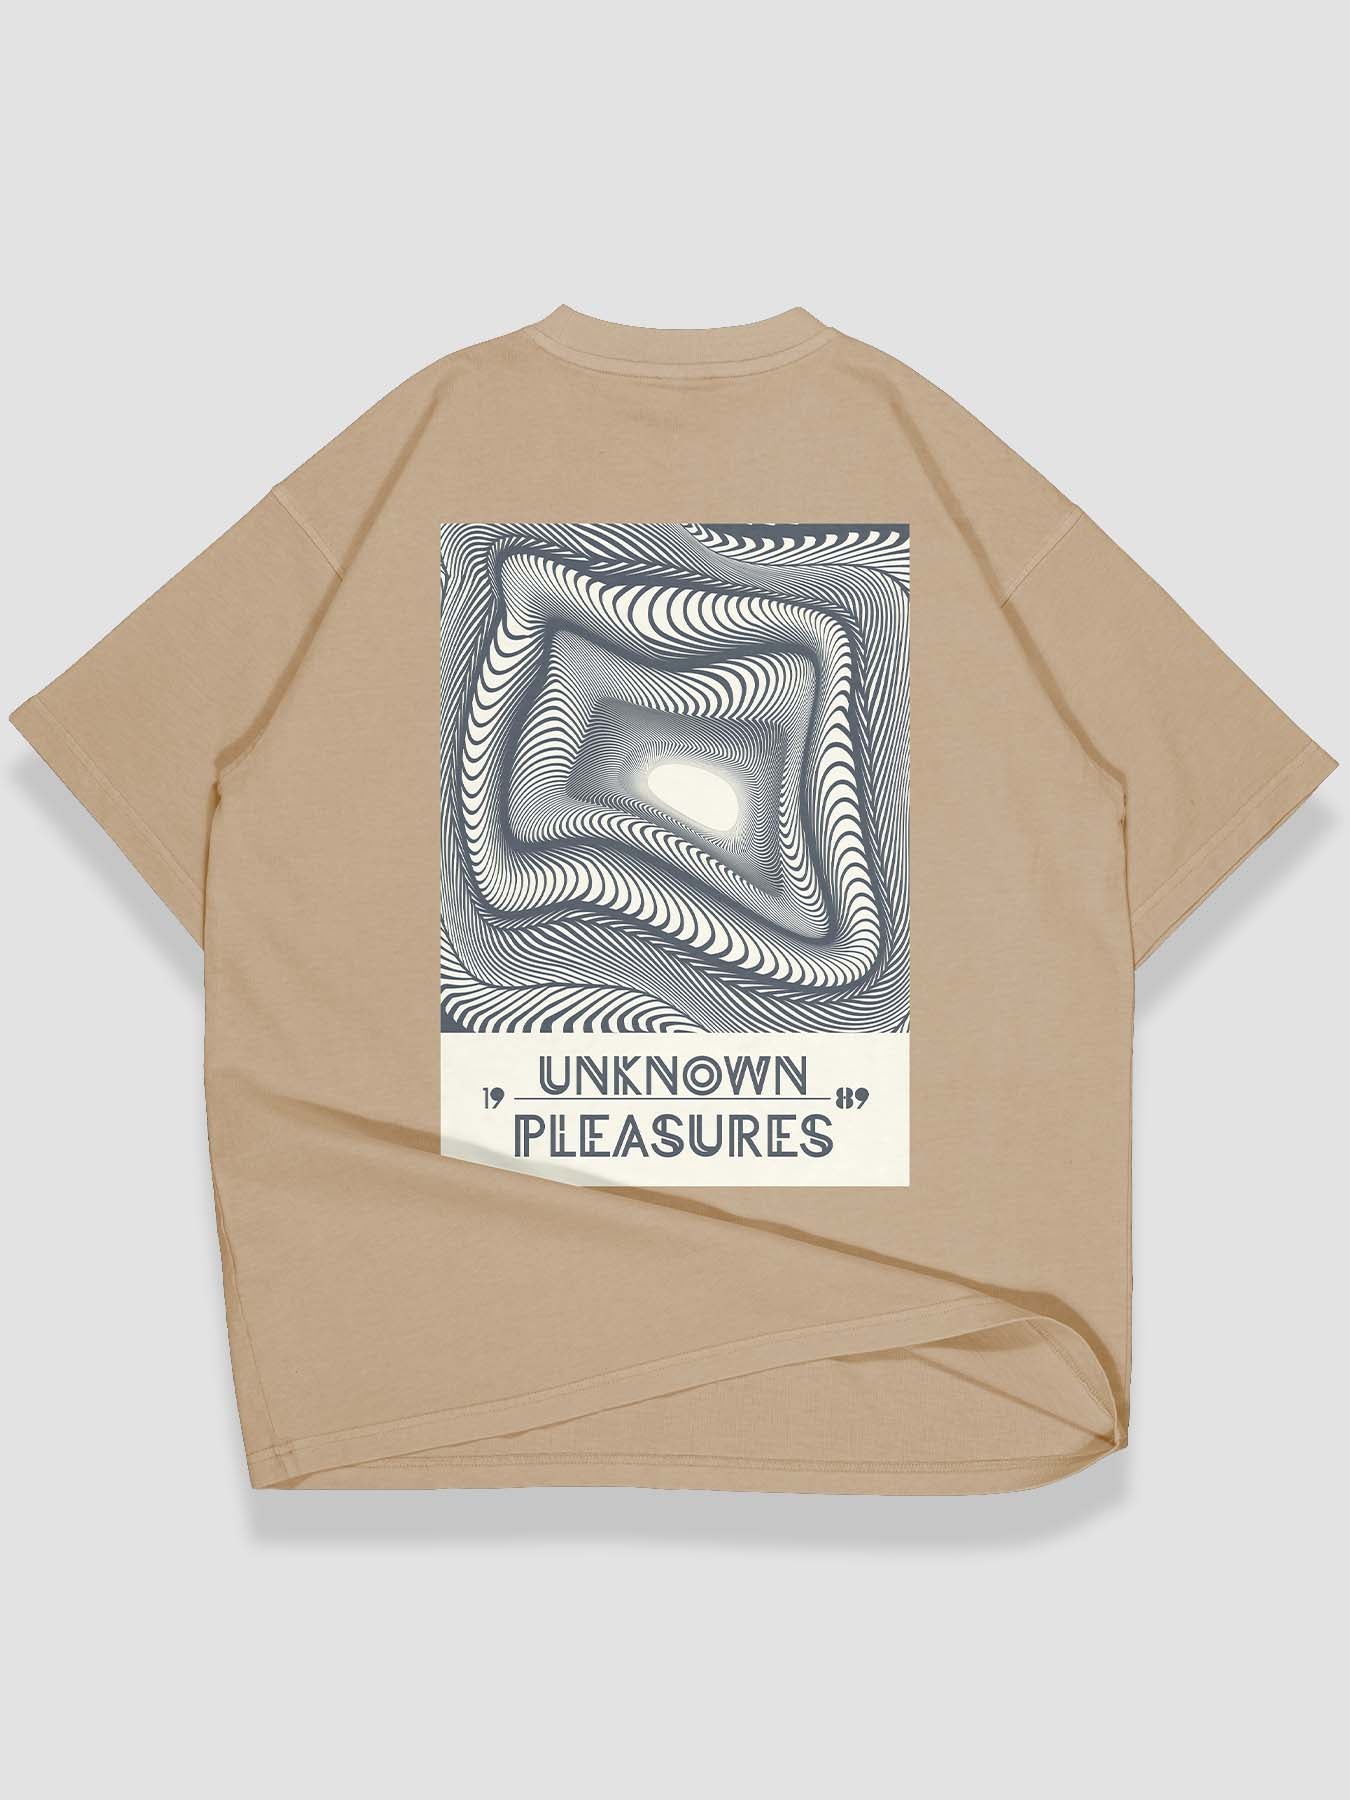 Unknown Pleasures Urban Fit Oversize T-shirt - keos.life